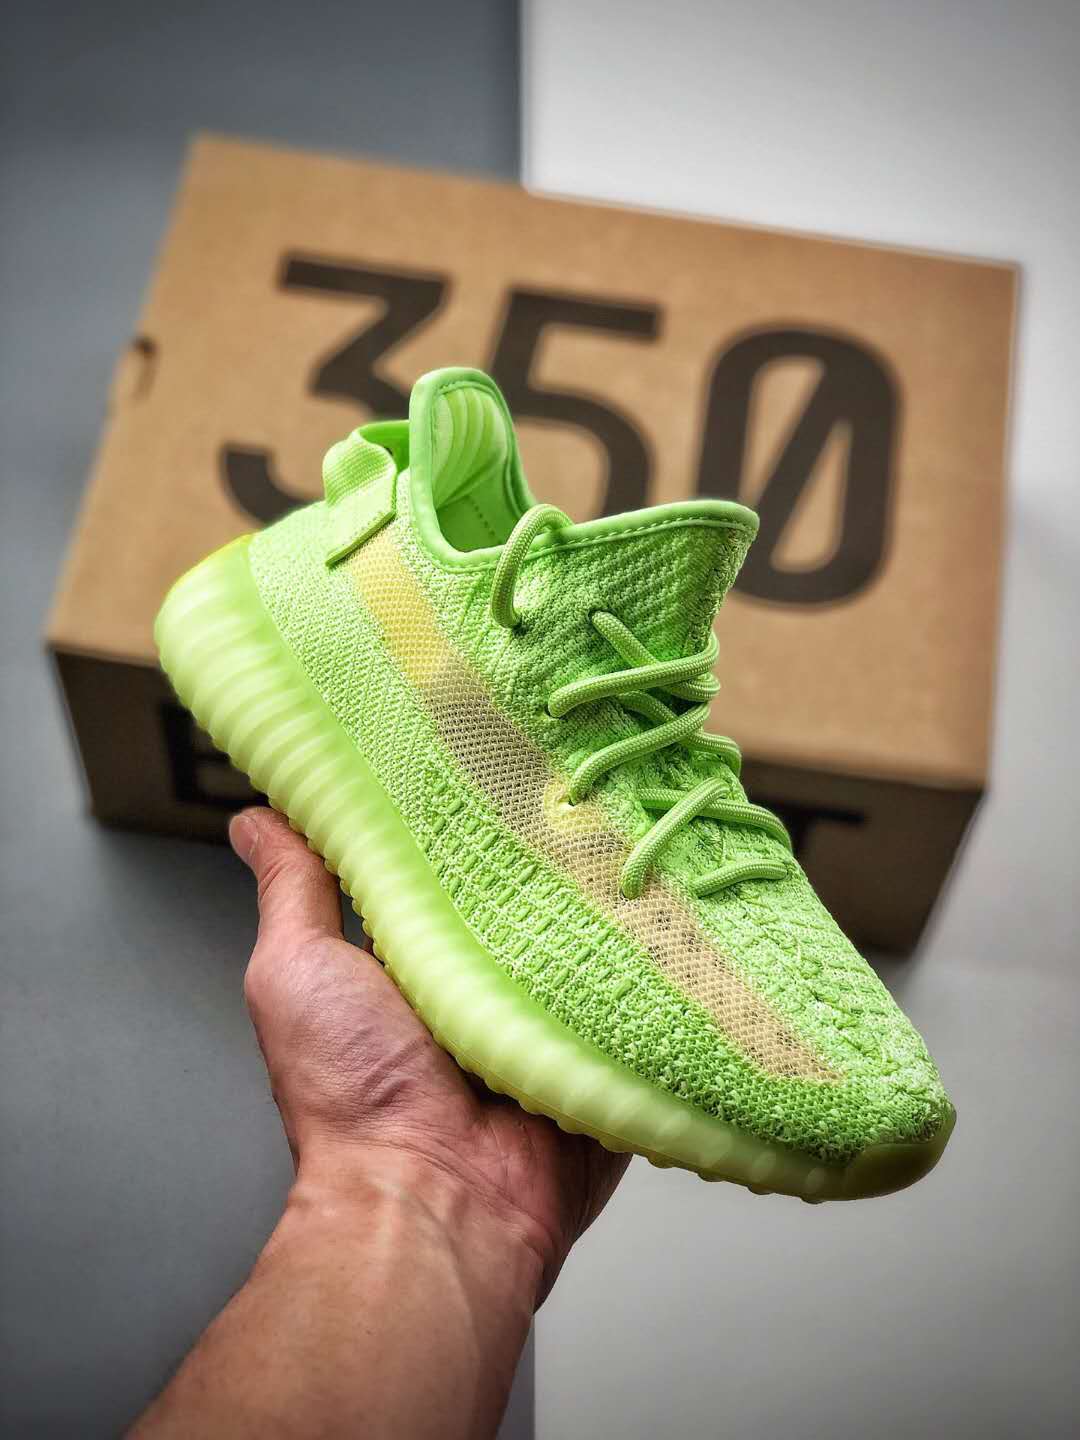 Adidas Yeezy Boost 350 V2 GID Glow - Shop the Stylish and Innovative Sneakers!